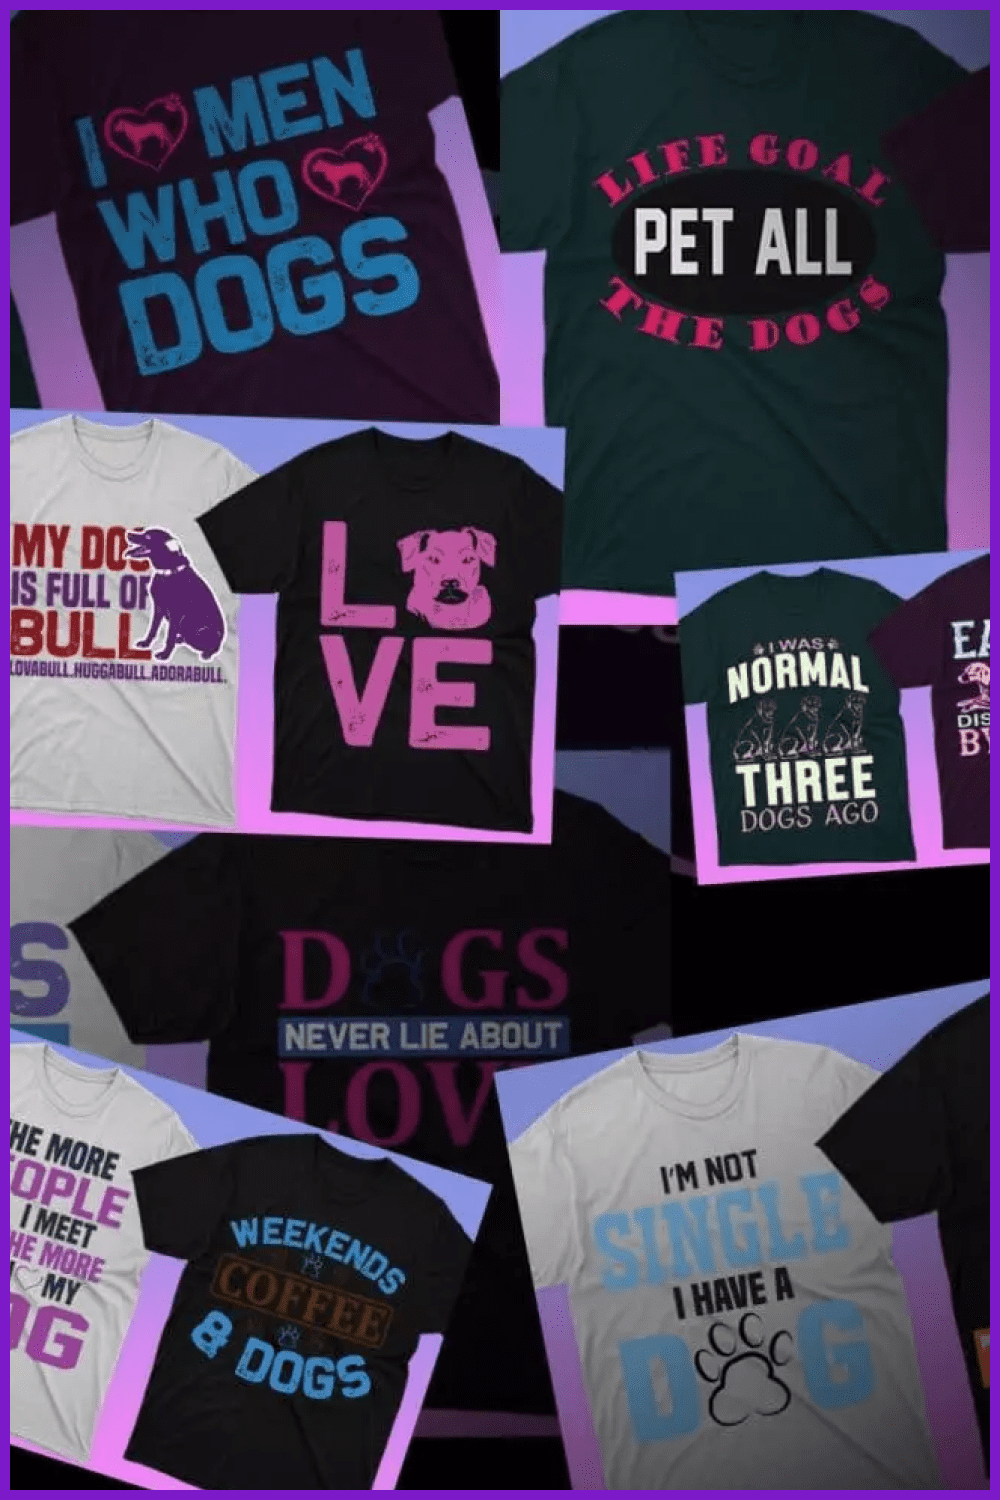 Collage of images of T-shirts in dark colors with text about dogs.